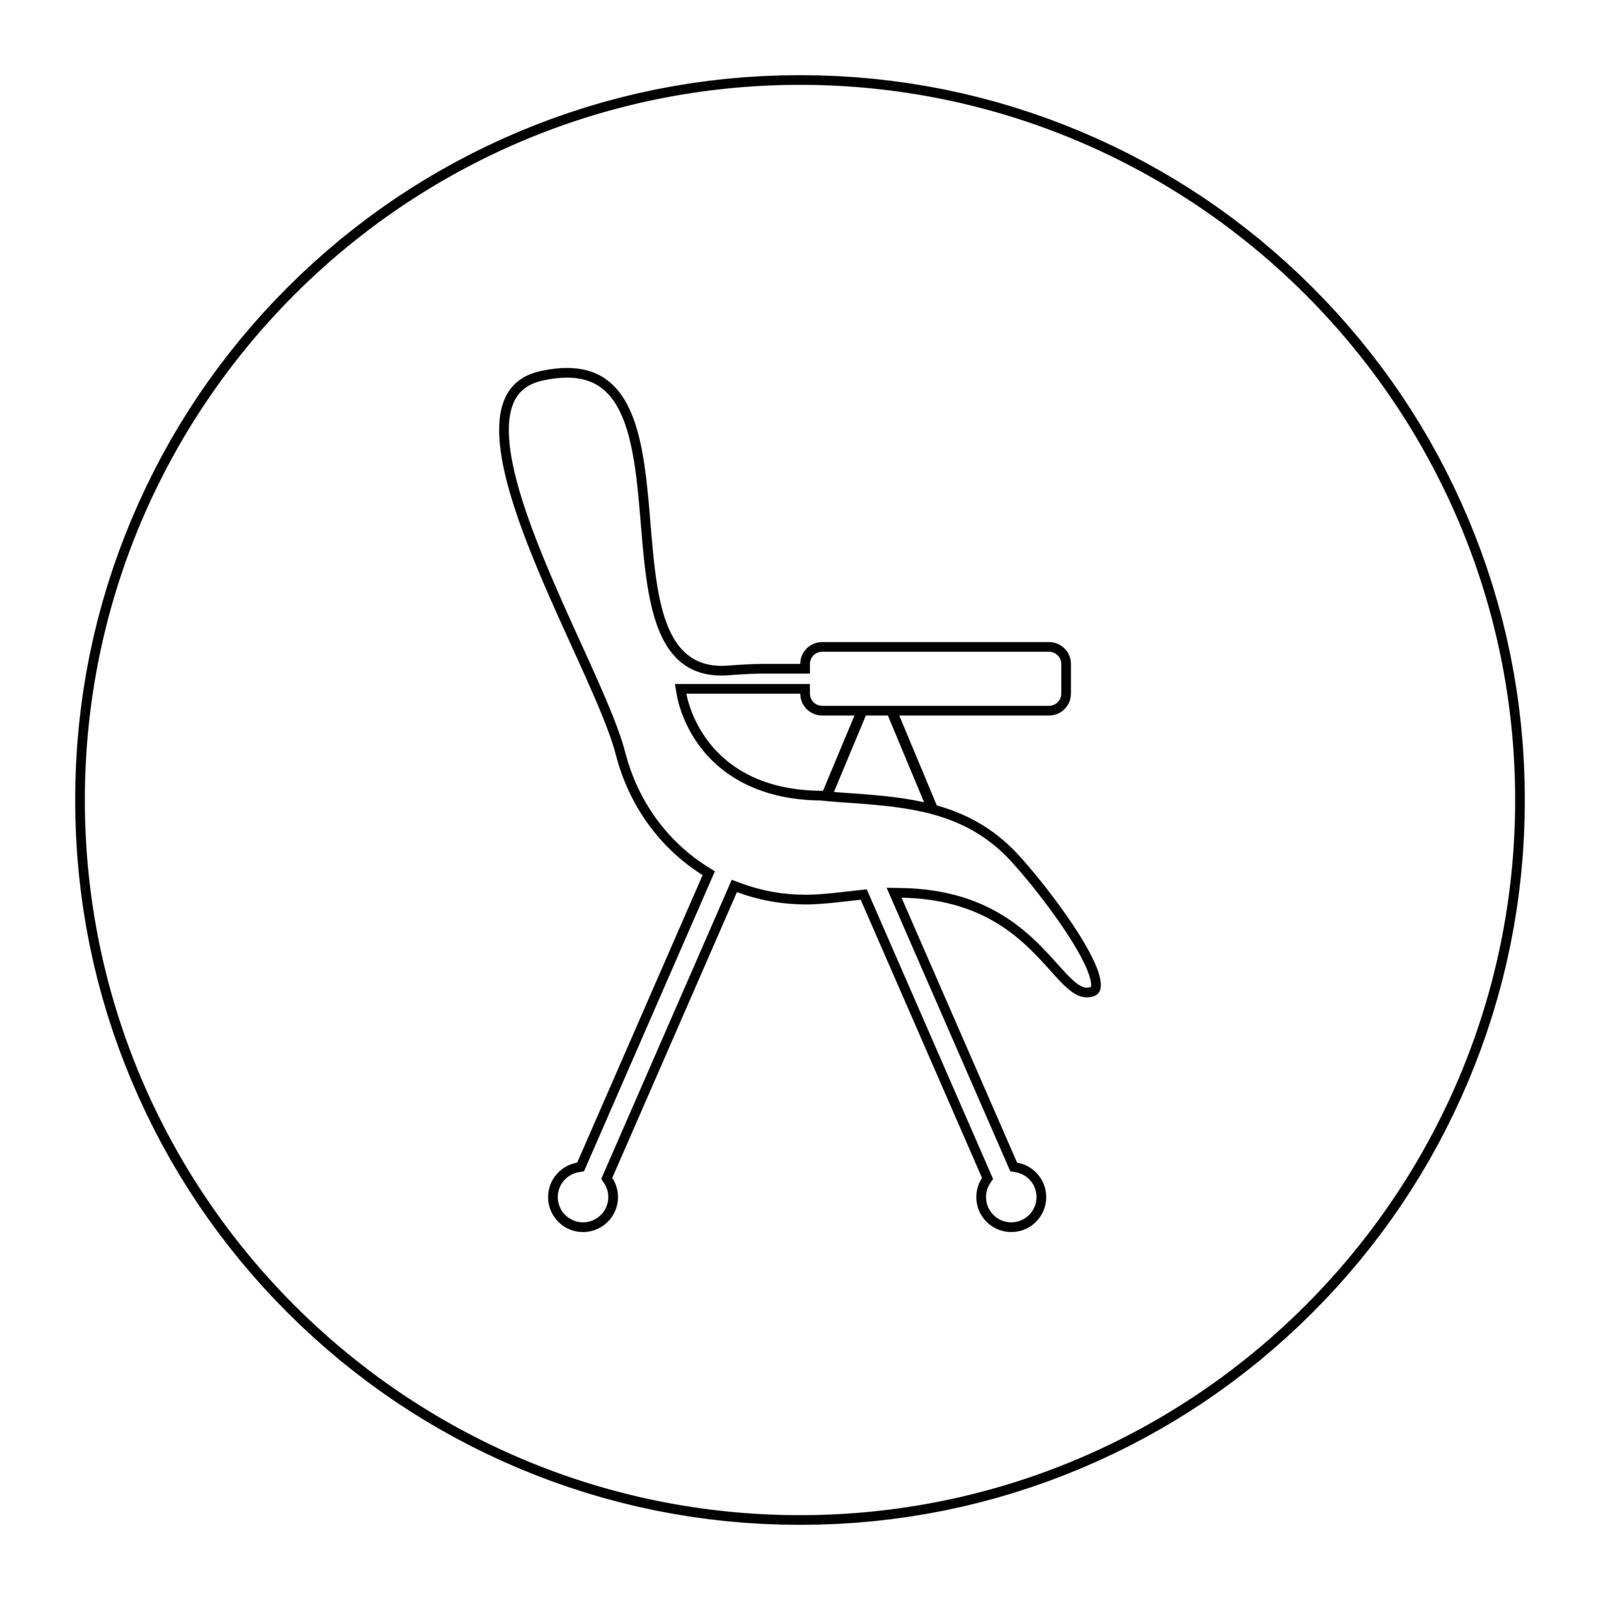 Feeding chair icon in circle round outline black color vector illustration flat style image by serhii435